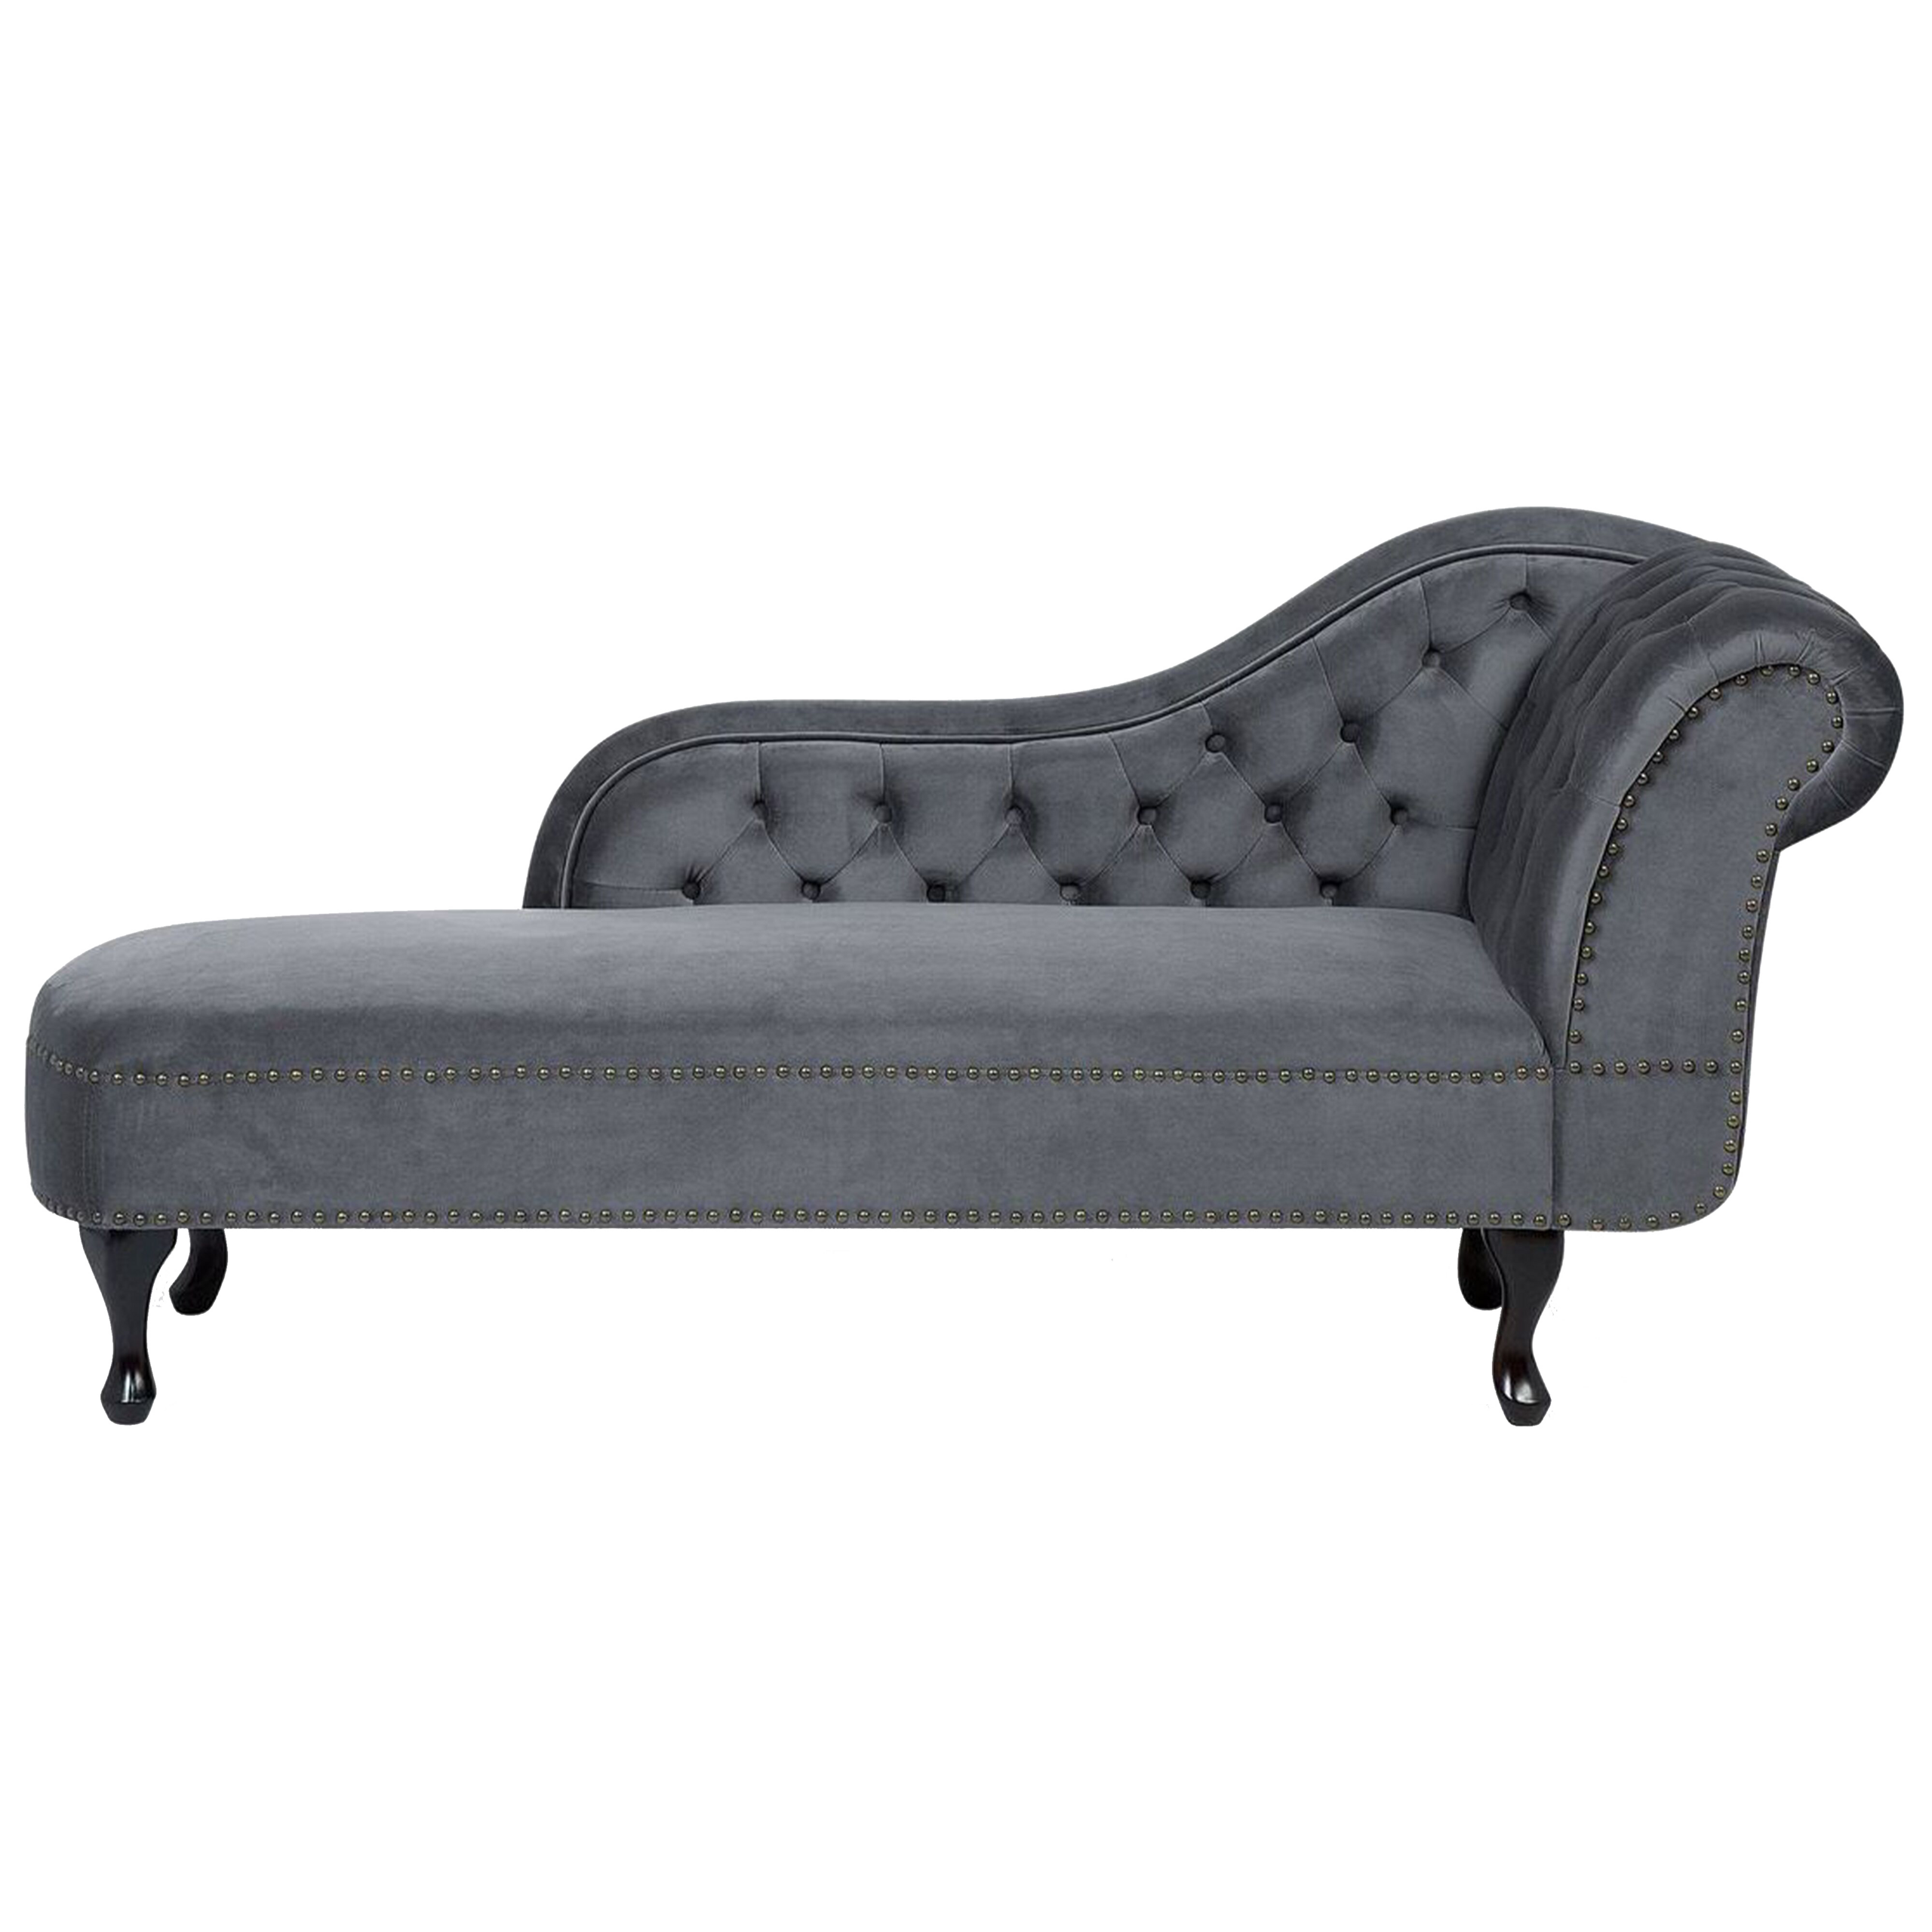 Beliani Chaise Lounge Grey Right Hand Velvet Buttoned Nailheads